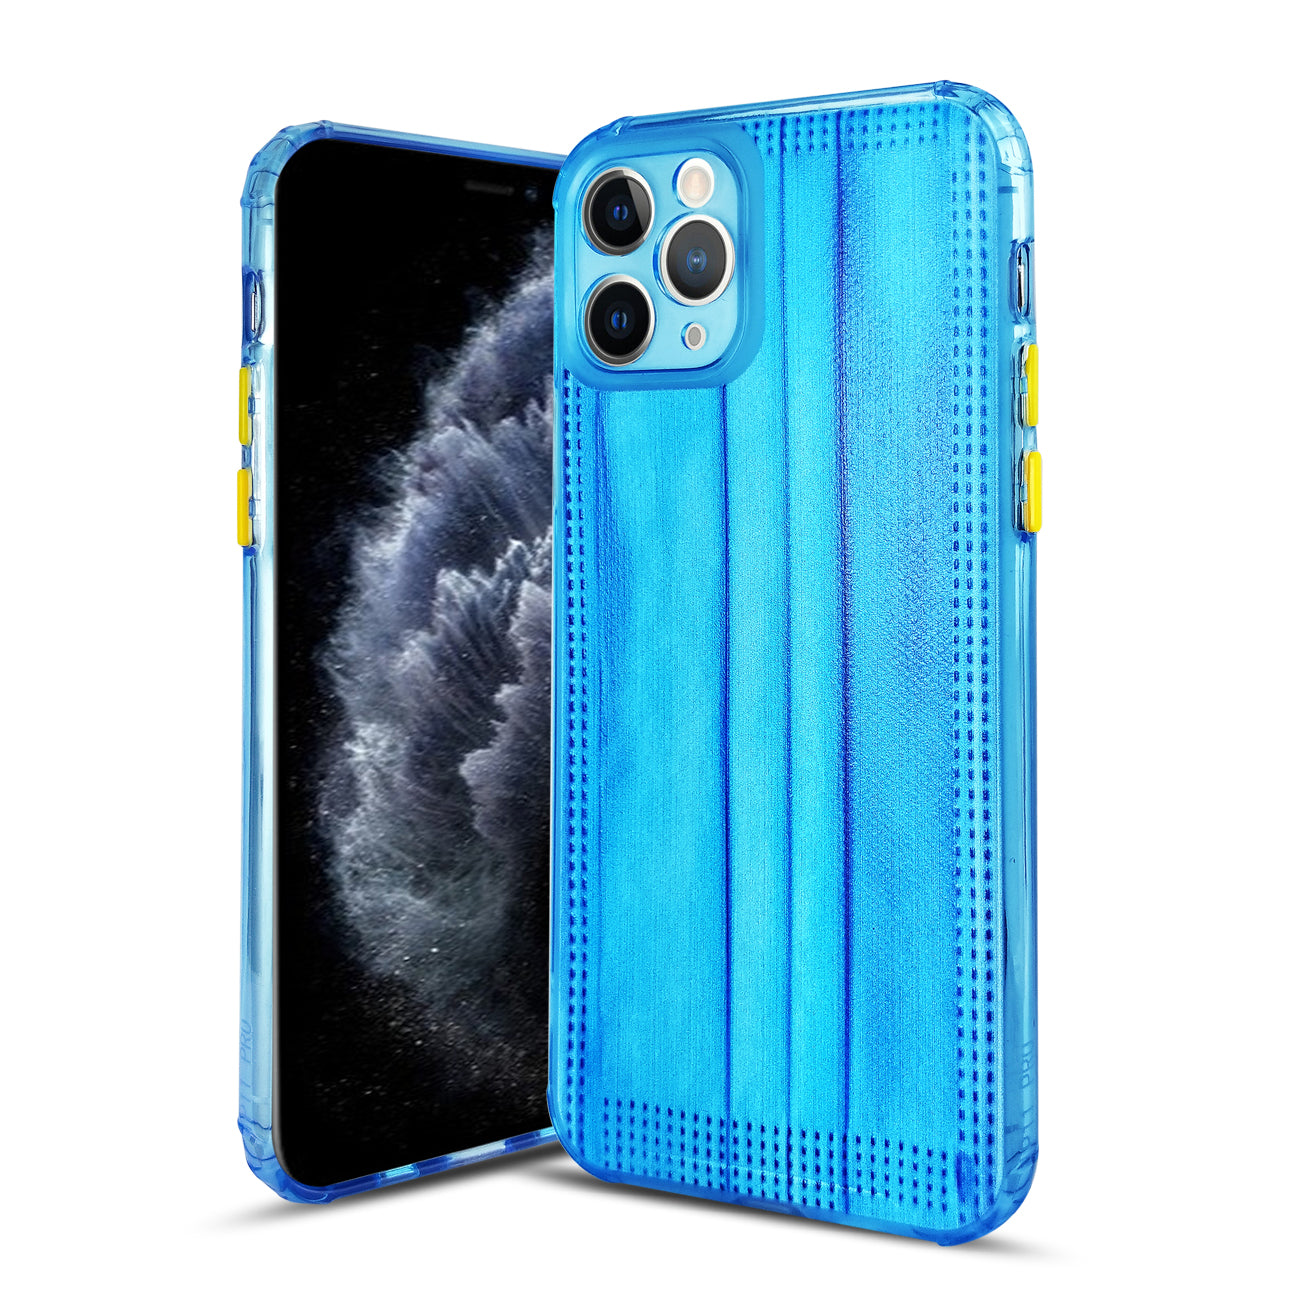 iPhone 11 Max Phone Case With Mask Design